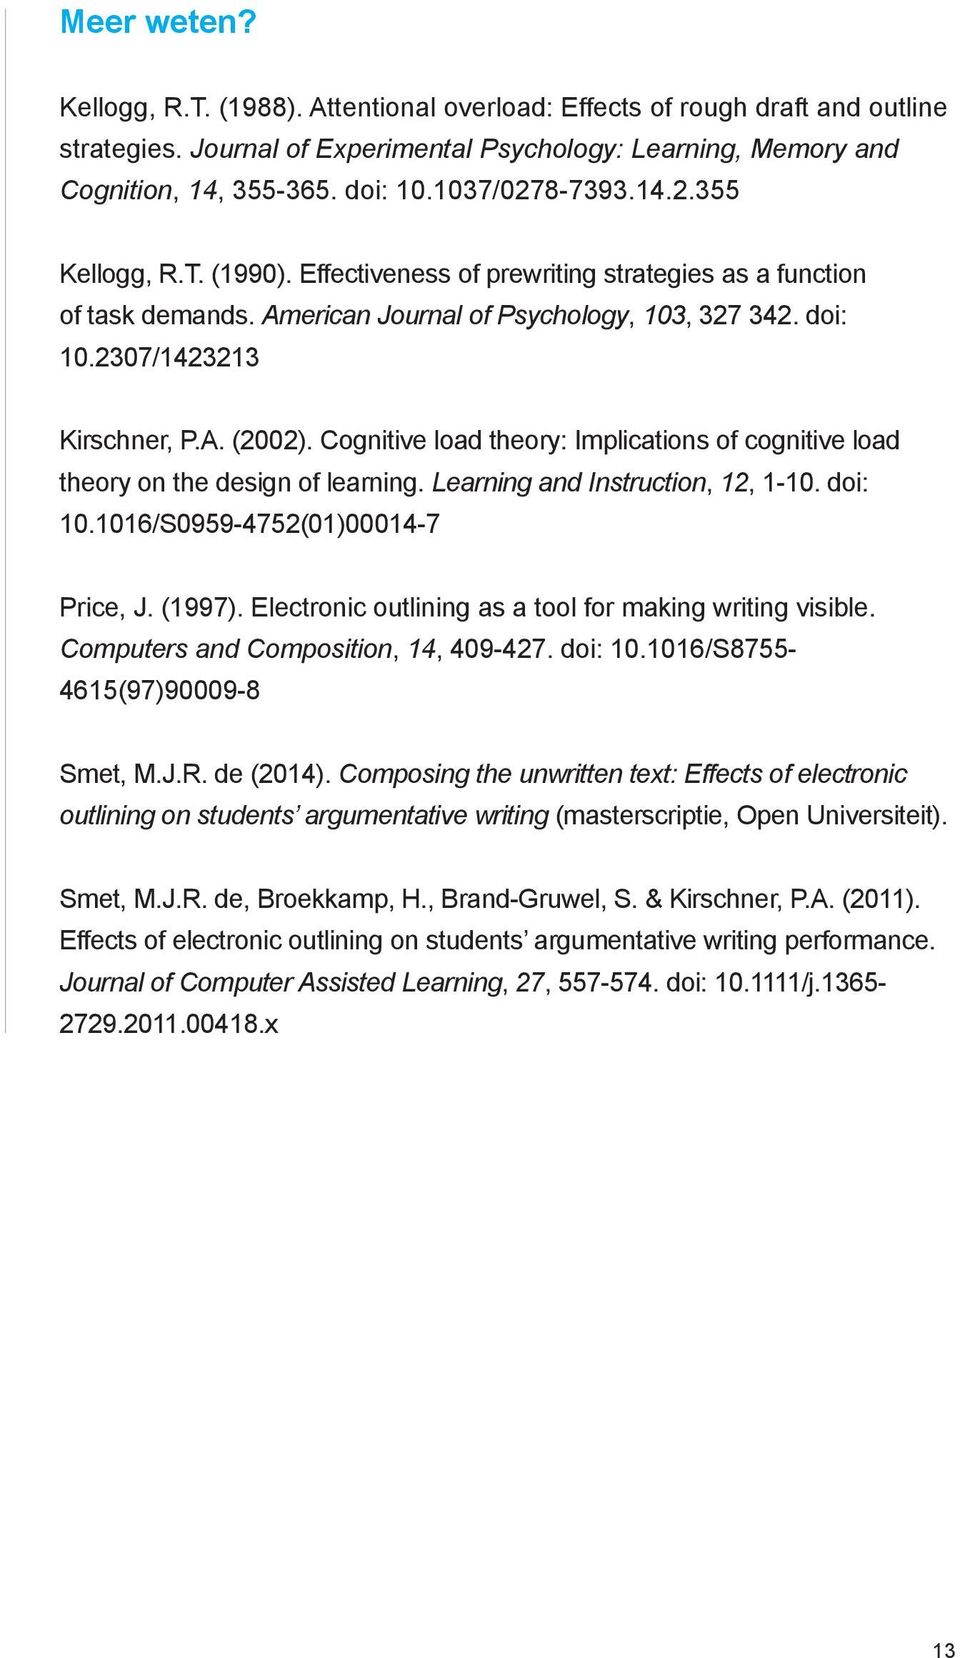 Cognitive load theory: Implications of cognitive load theory on the design of learning. Learning and Instruction, 12, 1-10. doi: 10.1016/S0959-4752(01)00014-7 Price, J. (1997).